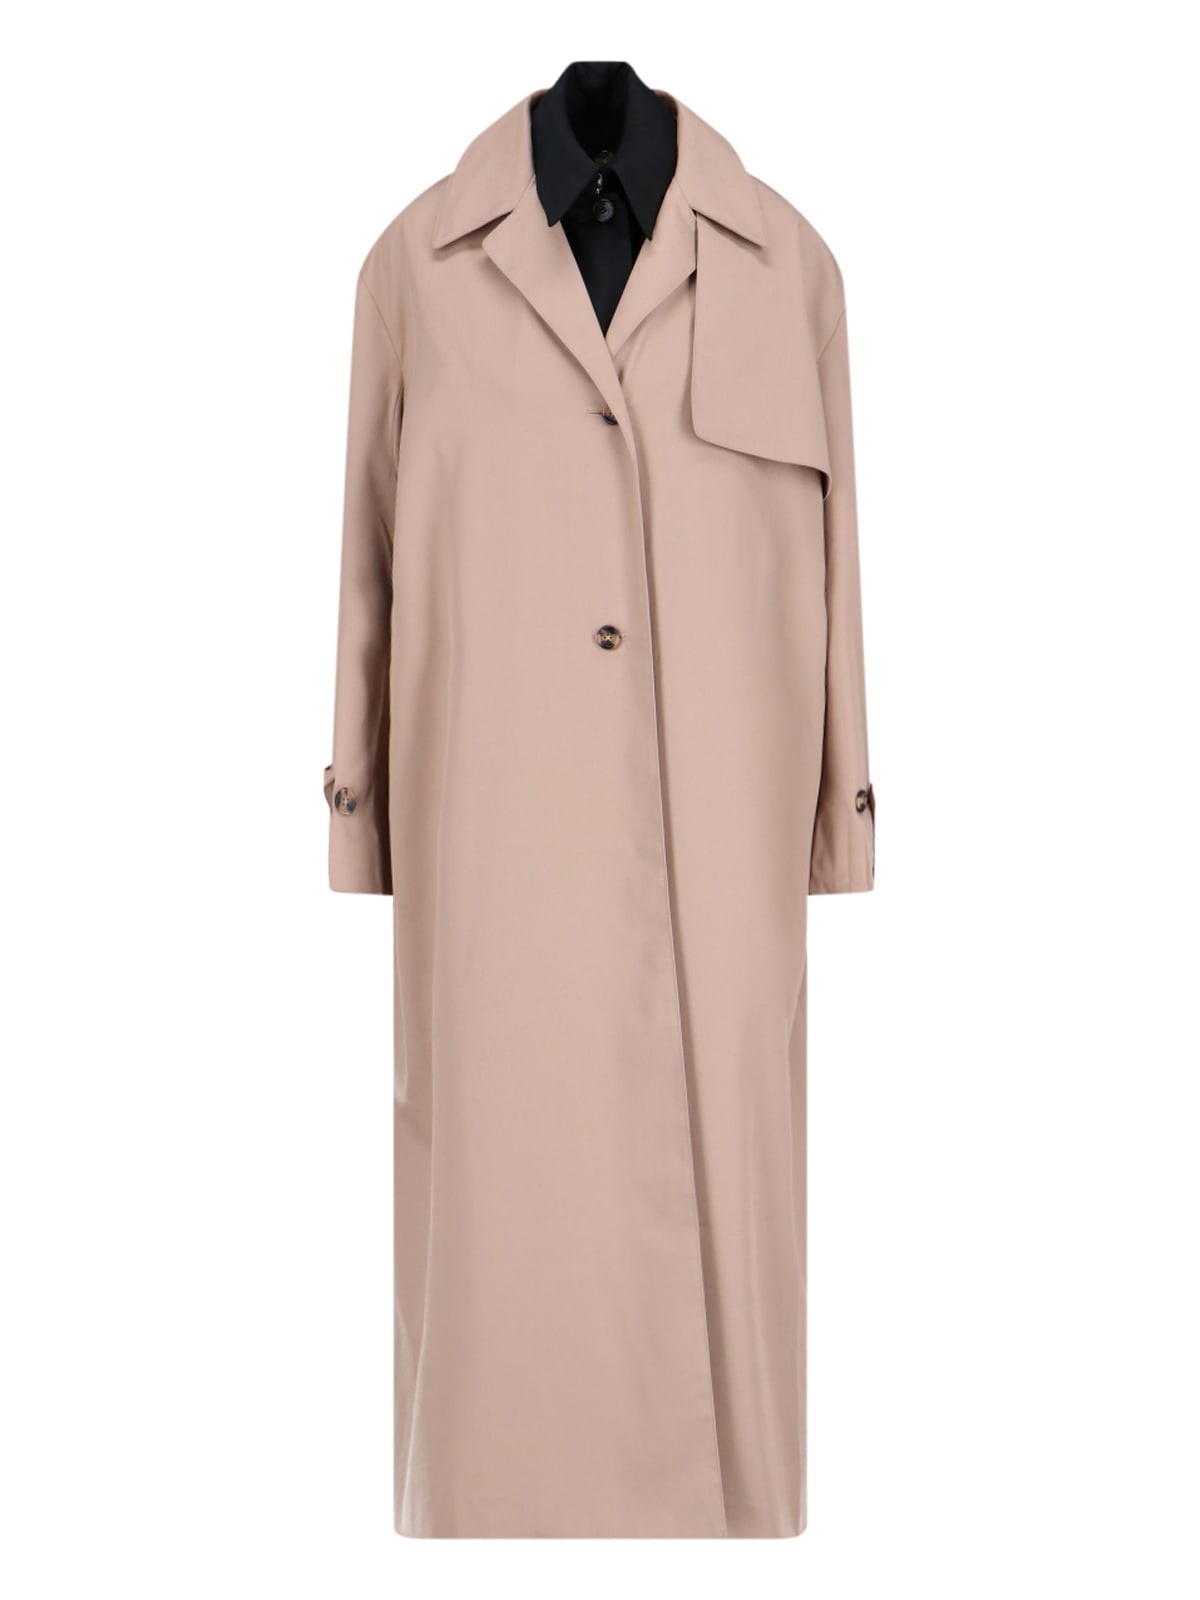 Double Layer Trench Coat